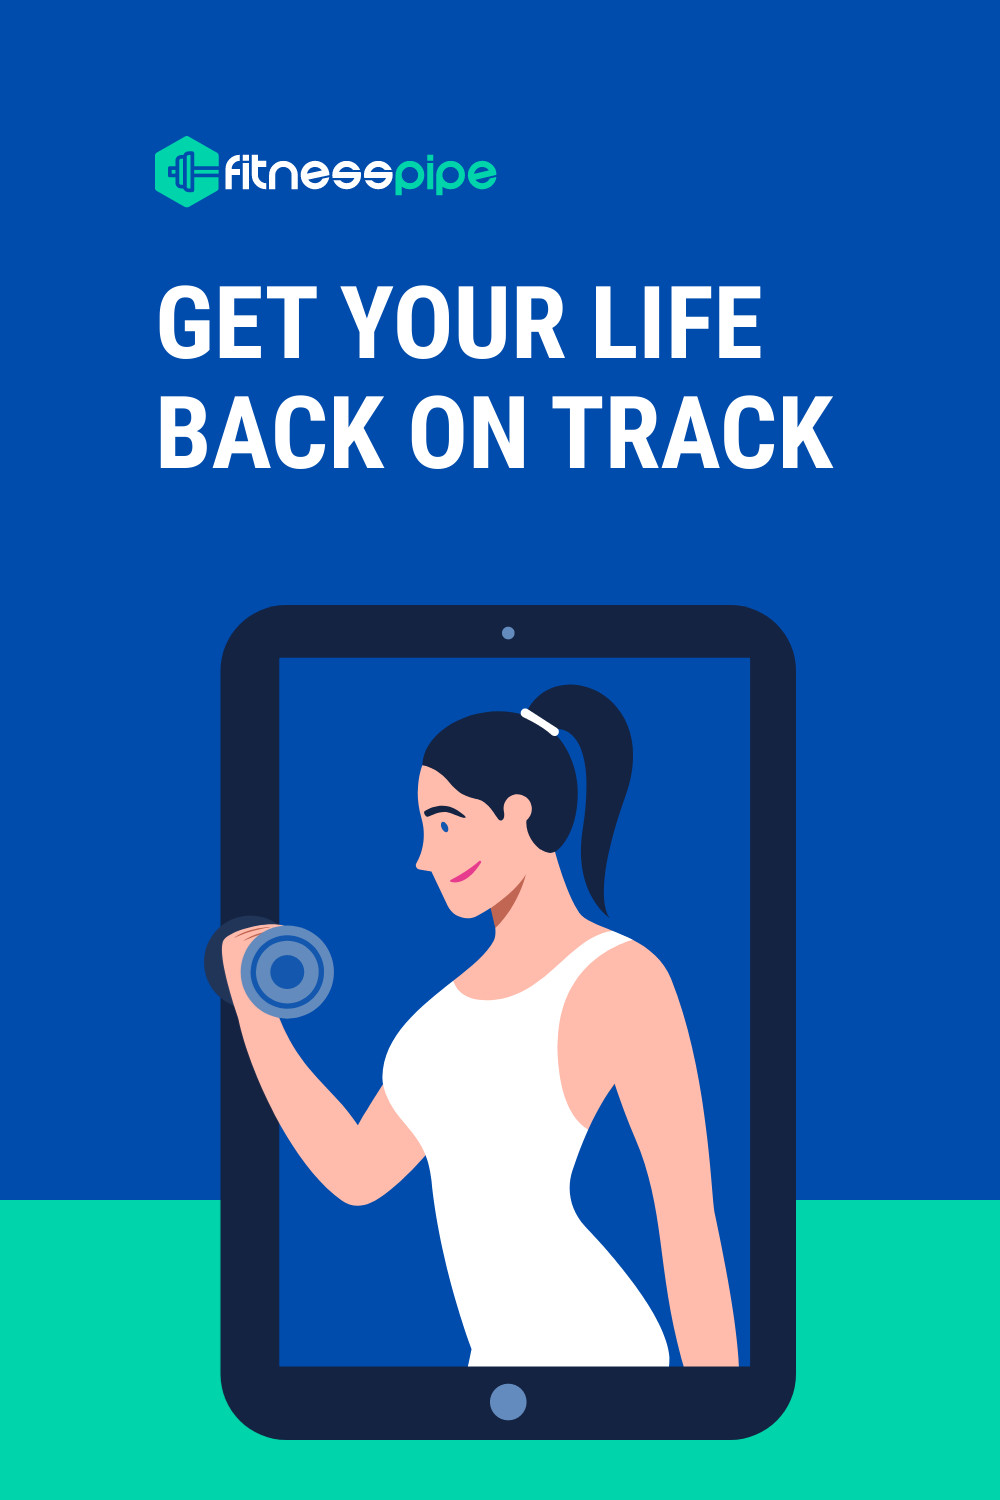 Life Back on Track with Fitness 